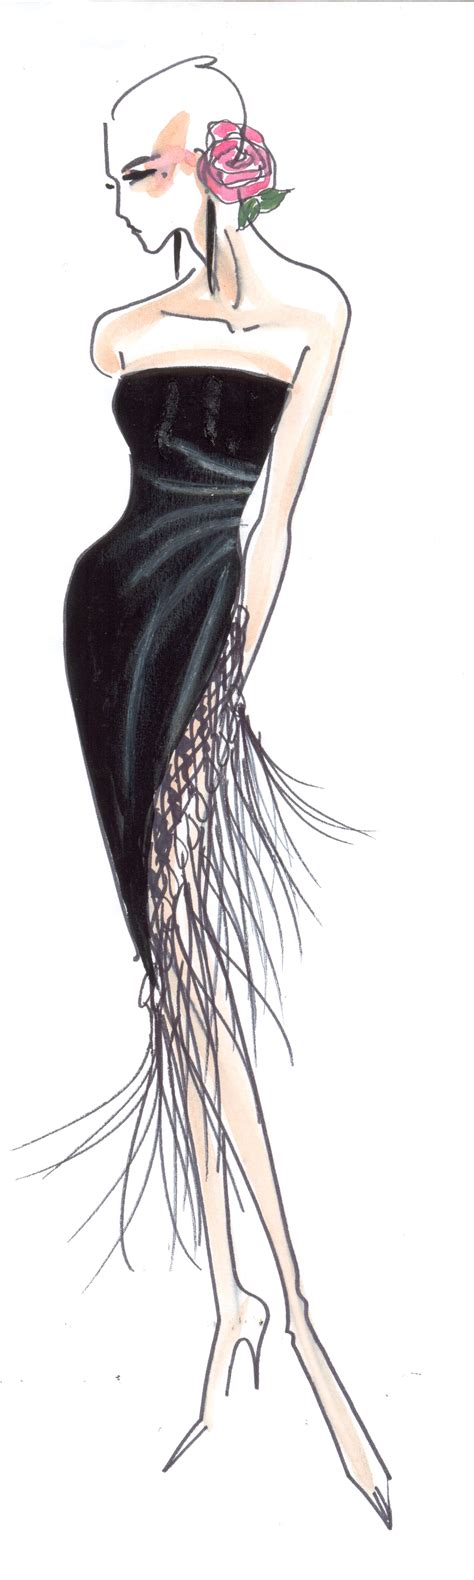 Little Black Dress Illustration Beville Sassoon At The Fashion And